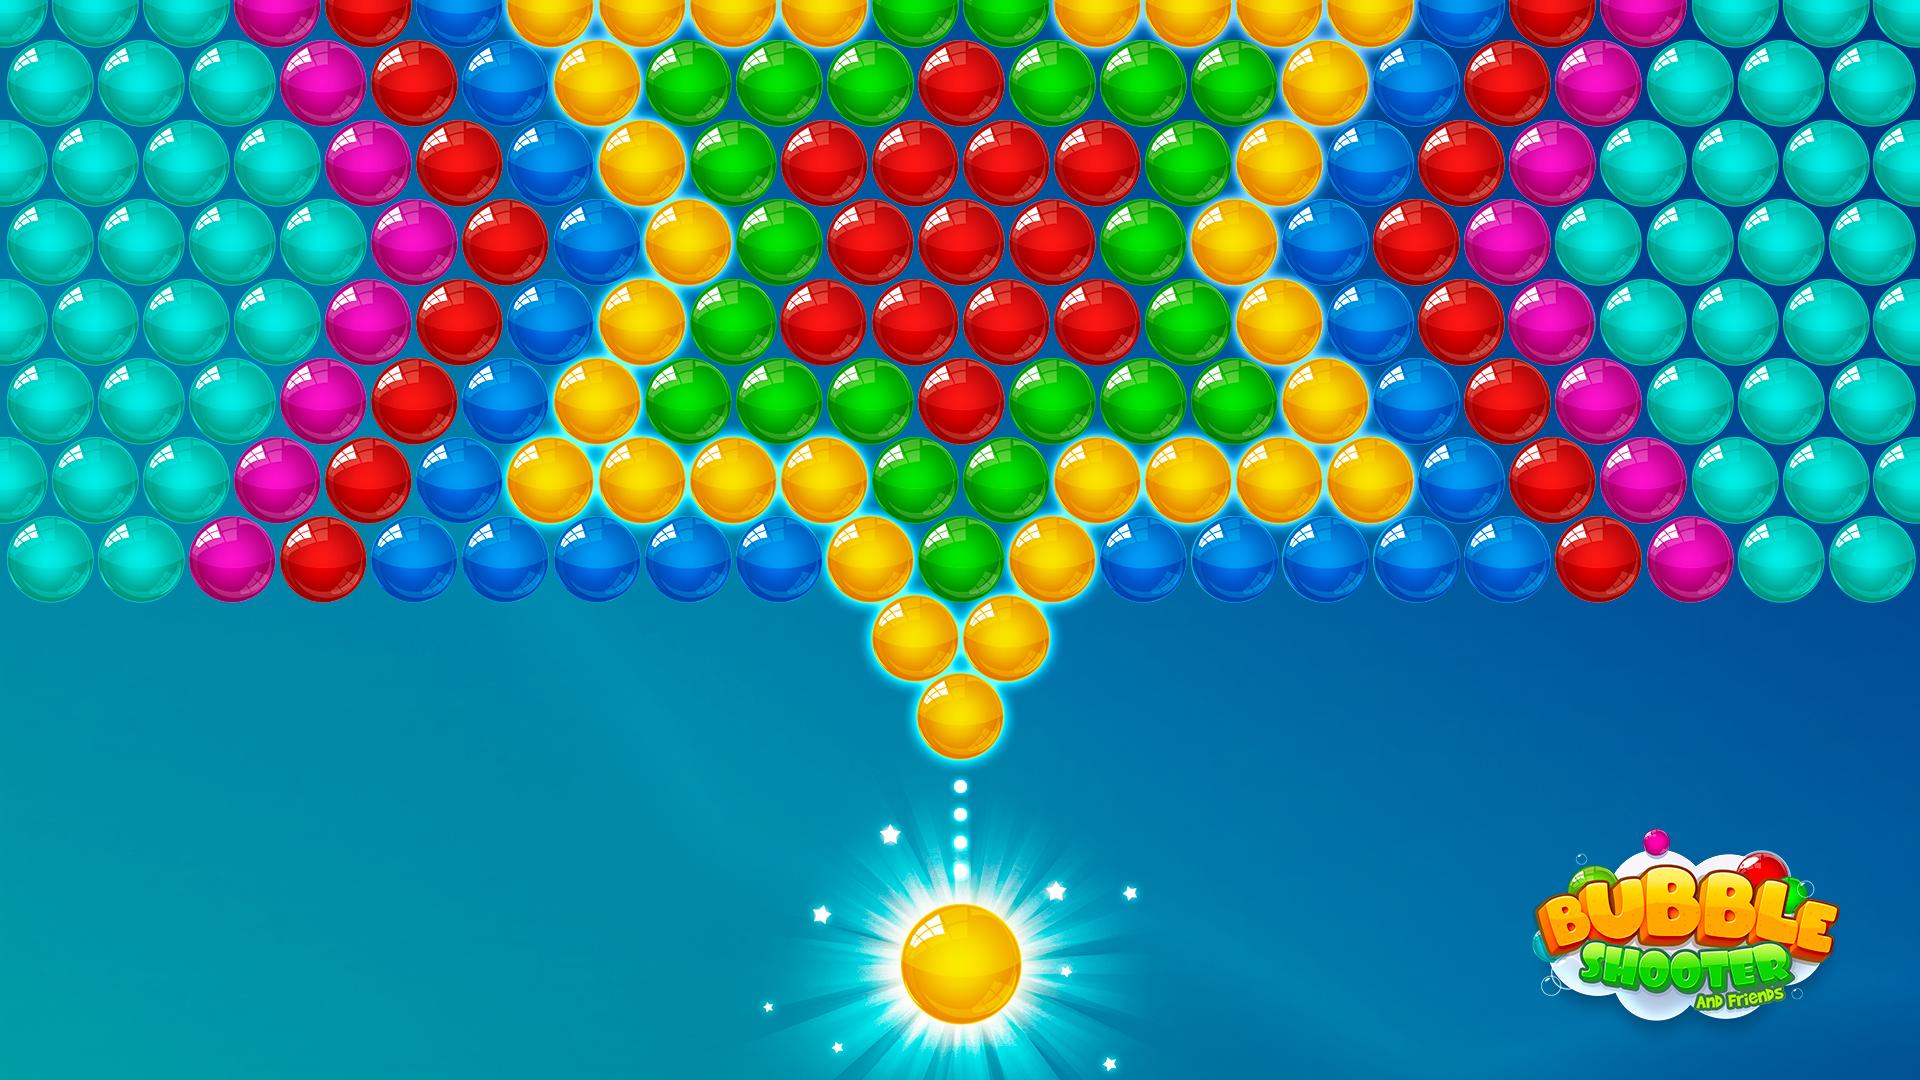 Bubble Shooter and friends. Bubble Shooter and friends 3д. Bubble Shooter Classic. Bubble Shooter старый. Бабл шутер энд френдс